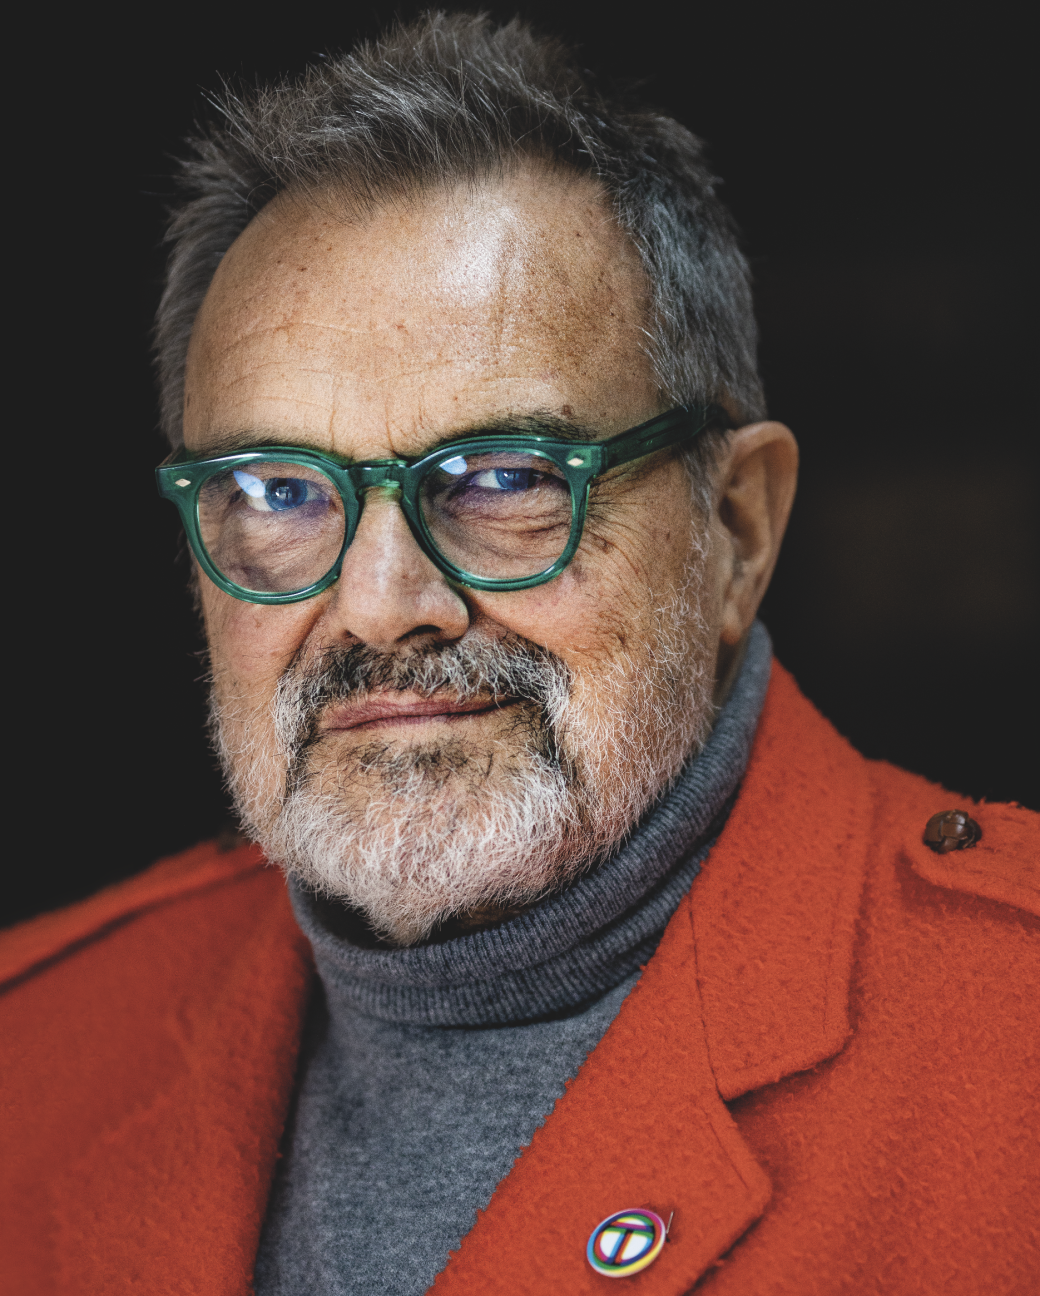 Our interview with Oliviero Toscani